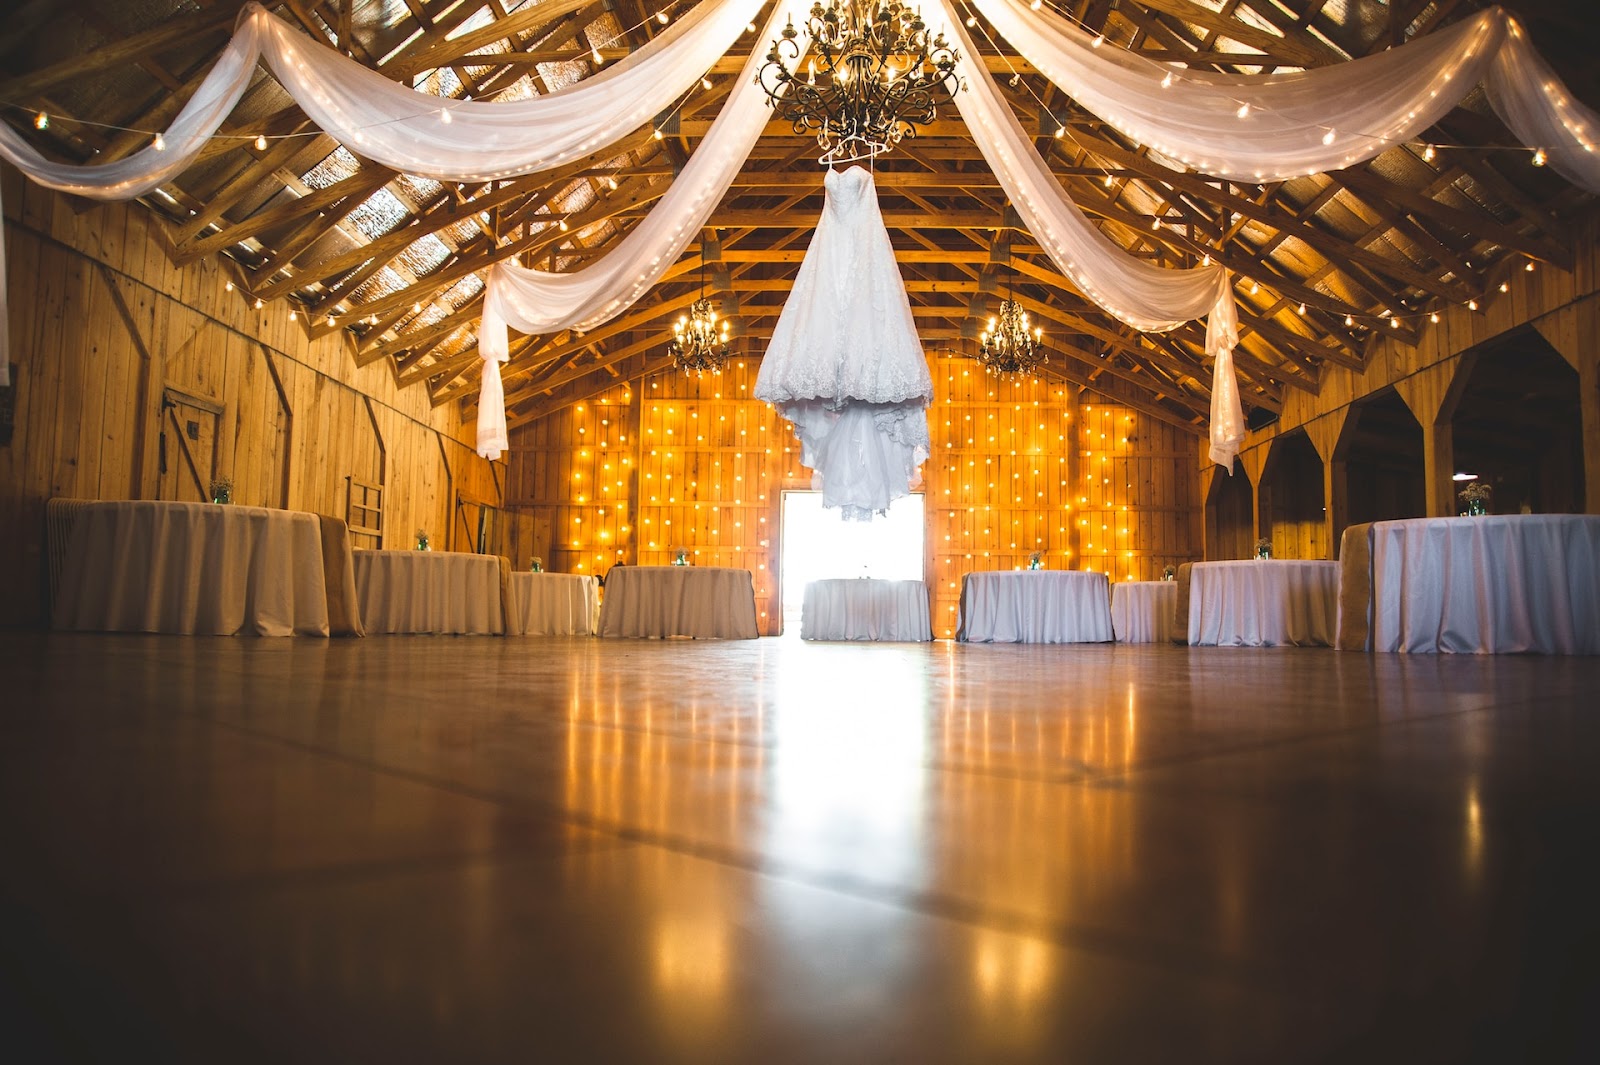 questions to ask when viewing a wedding venue